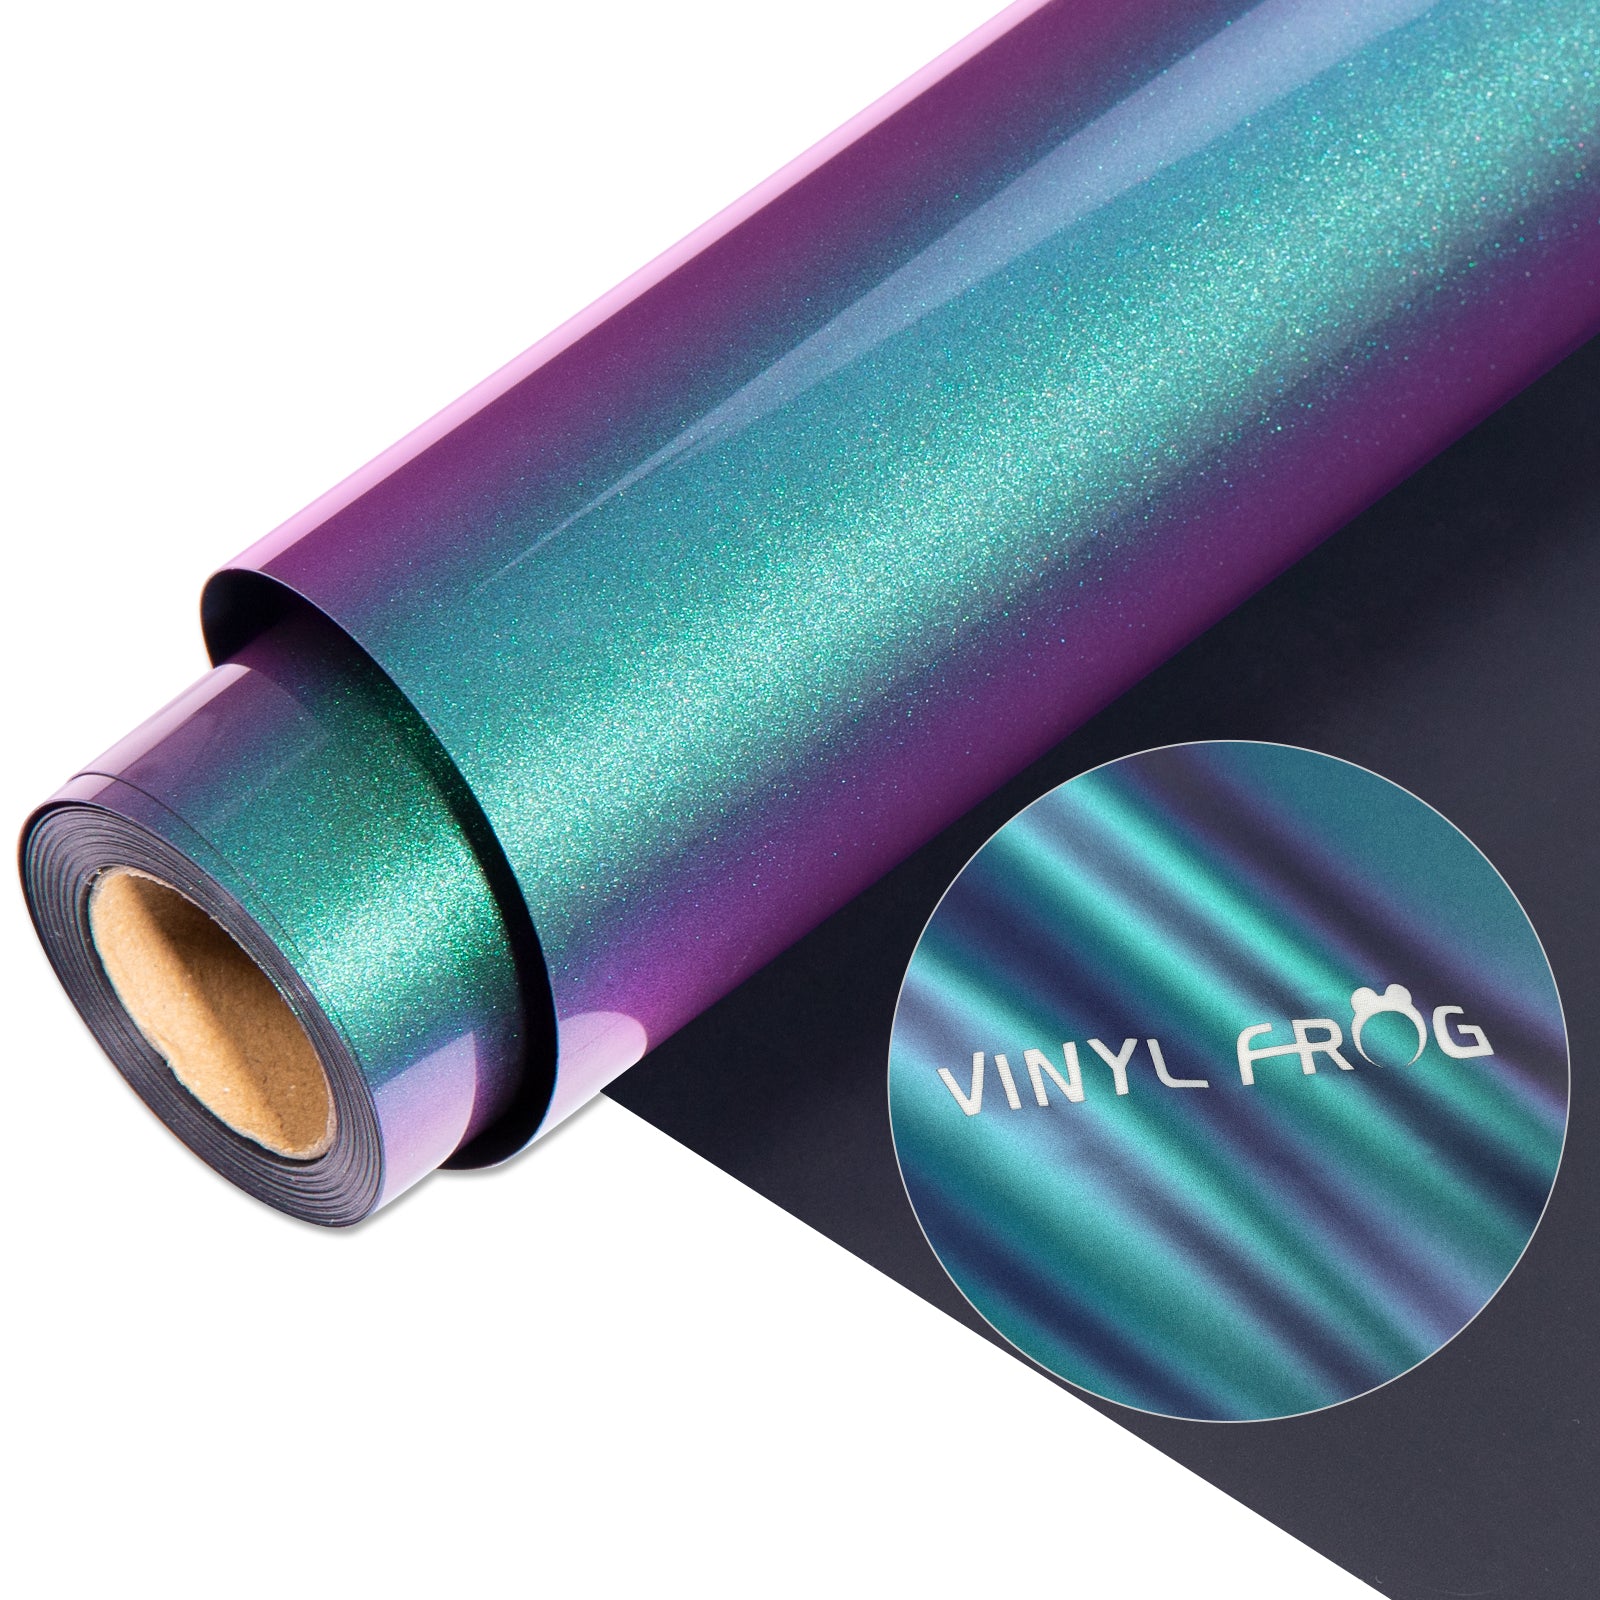 【Clearance Sale】Chameleon Heat Transfer Vinyl Roll - 12 x 30 ft (11 Colors), Purple to Green